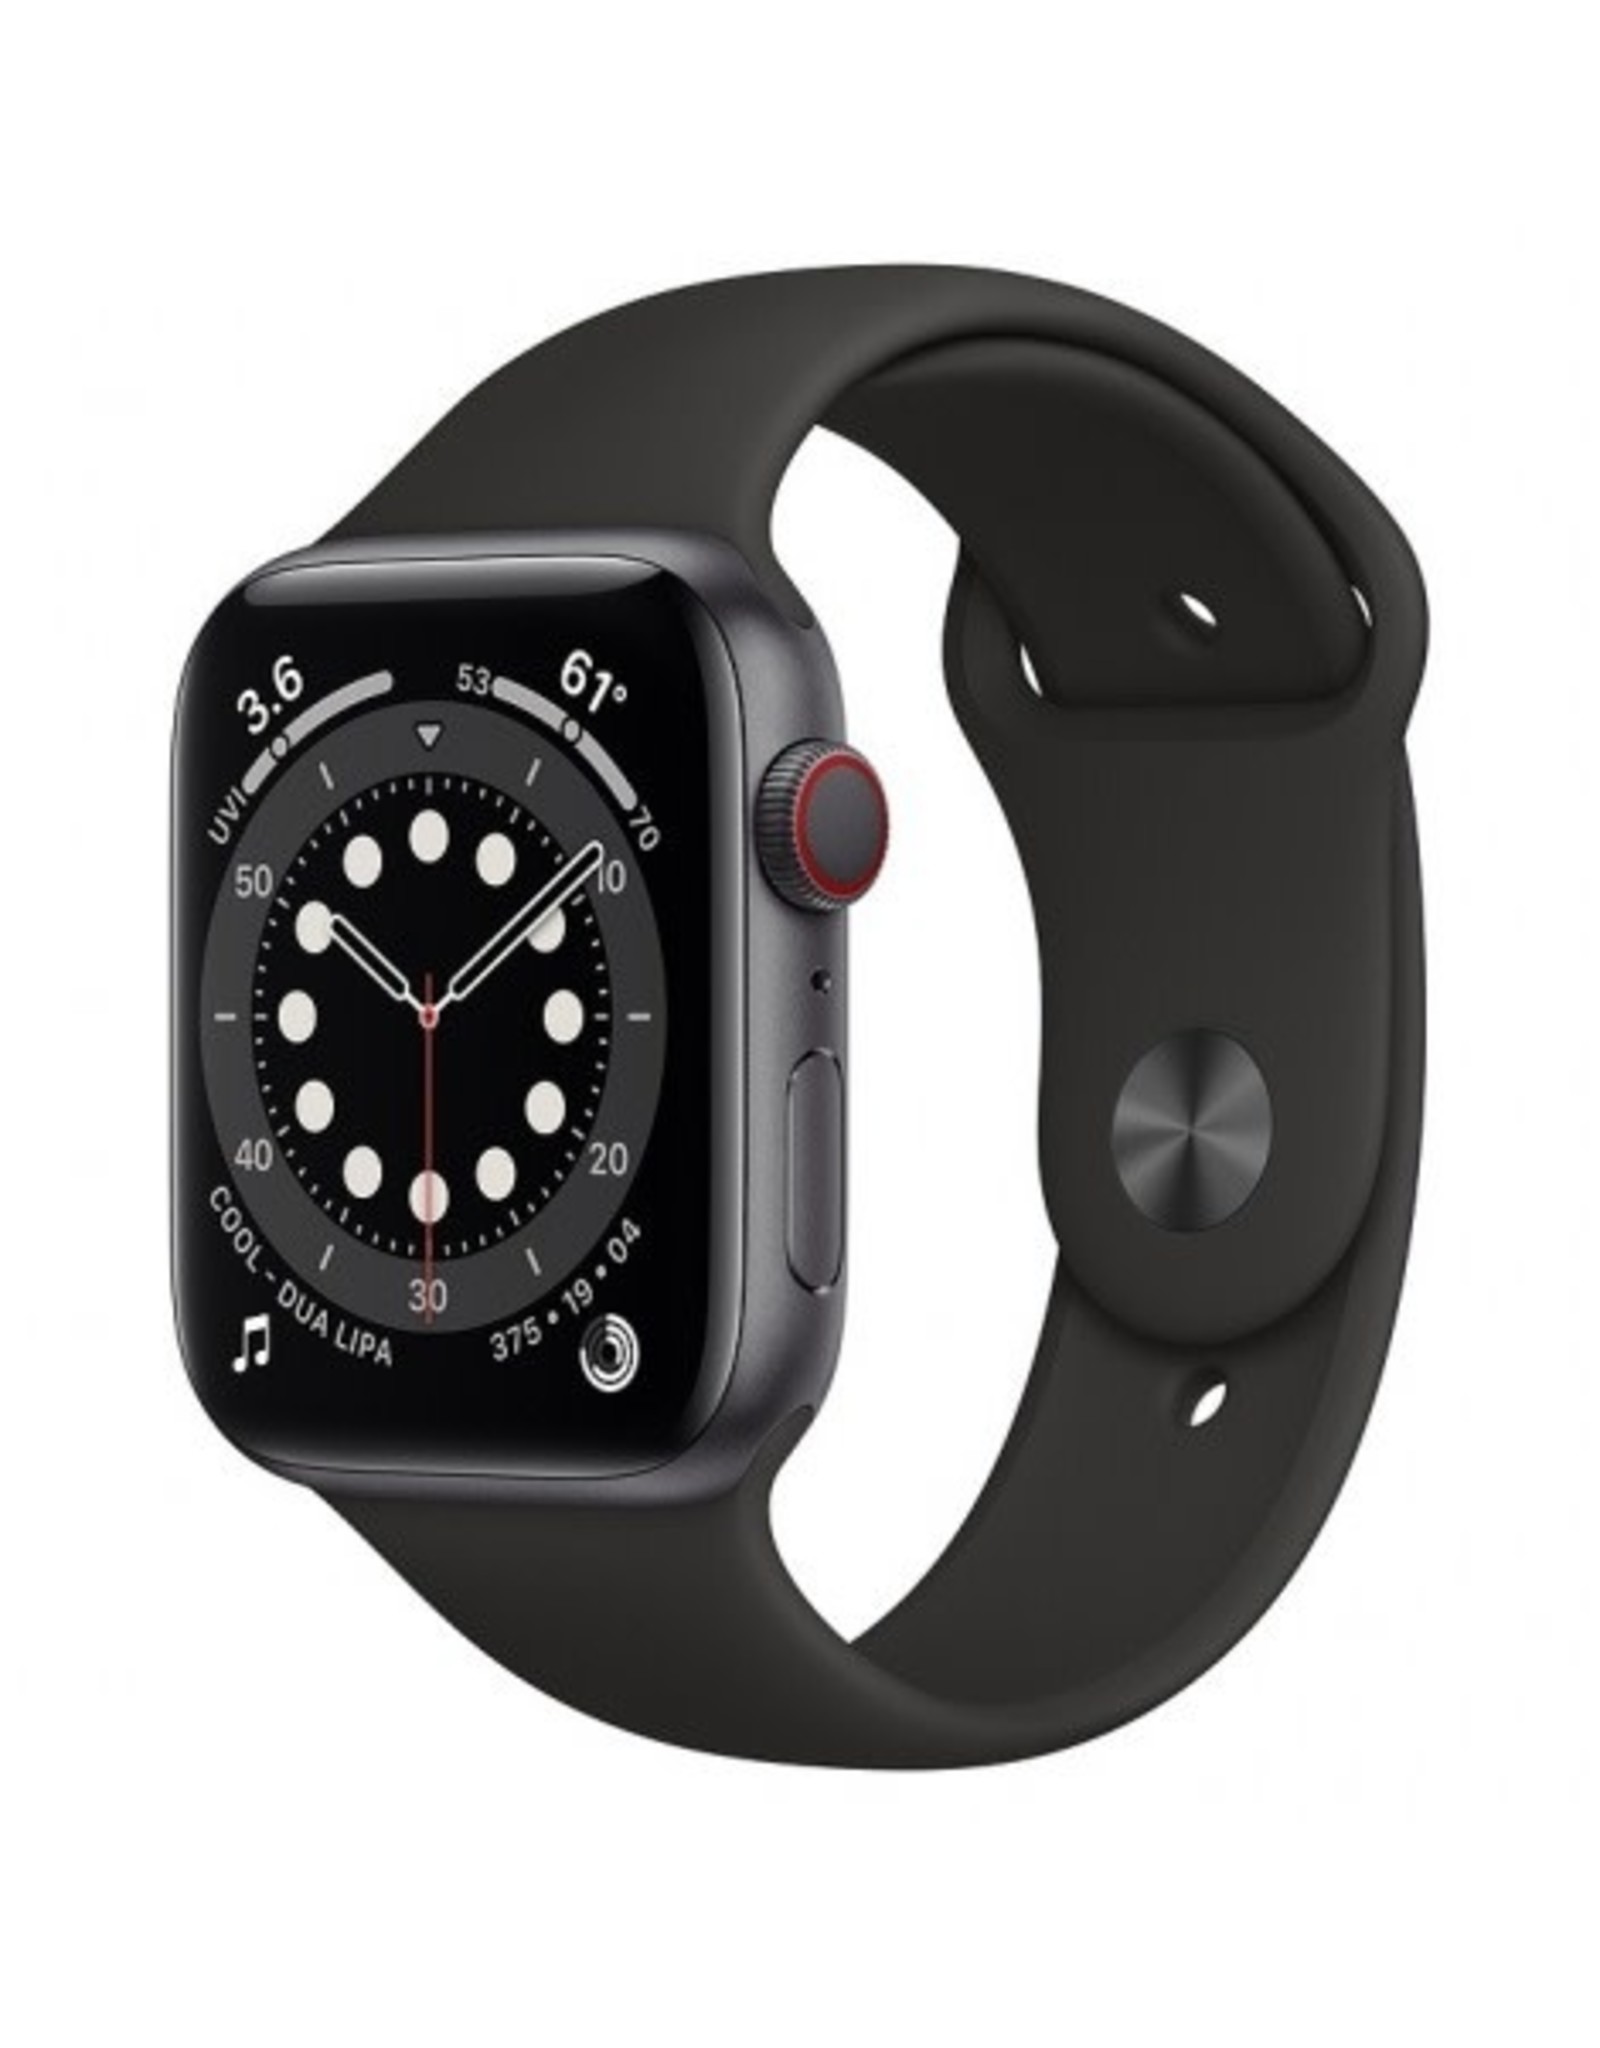 Apple Apple Watch Series 6 GPS, 40mm Space Gray Aluminum Case with Black Sport Band - Regular